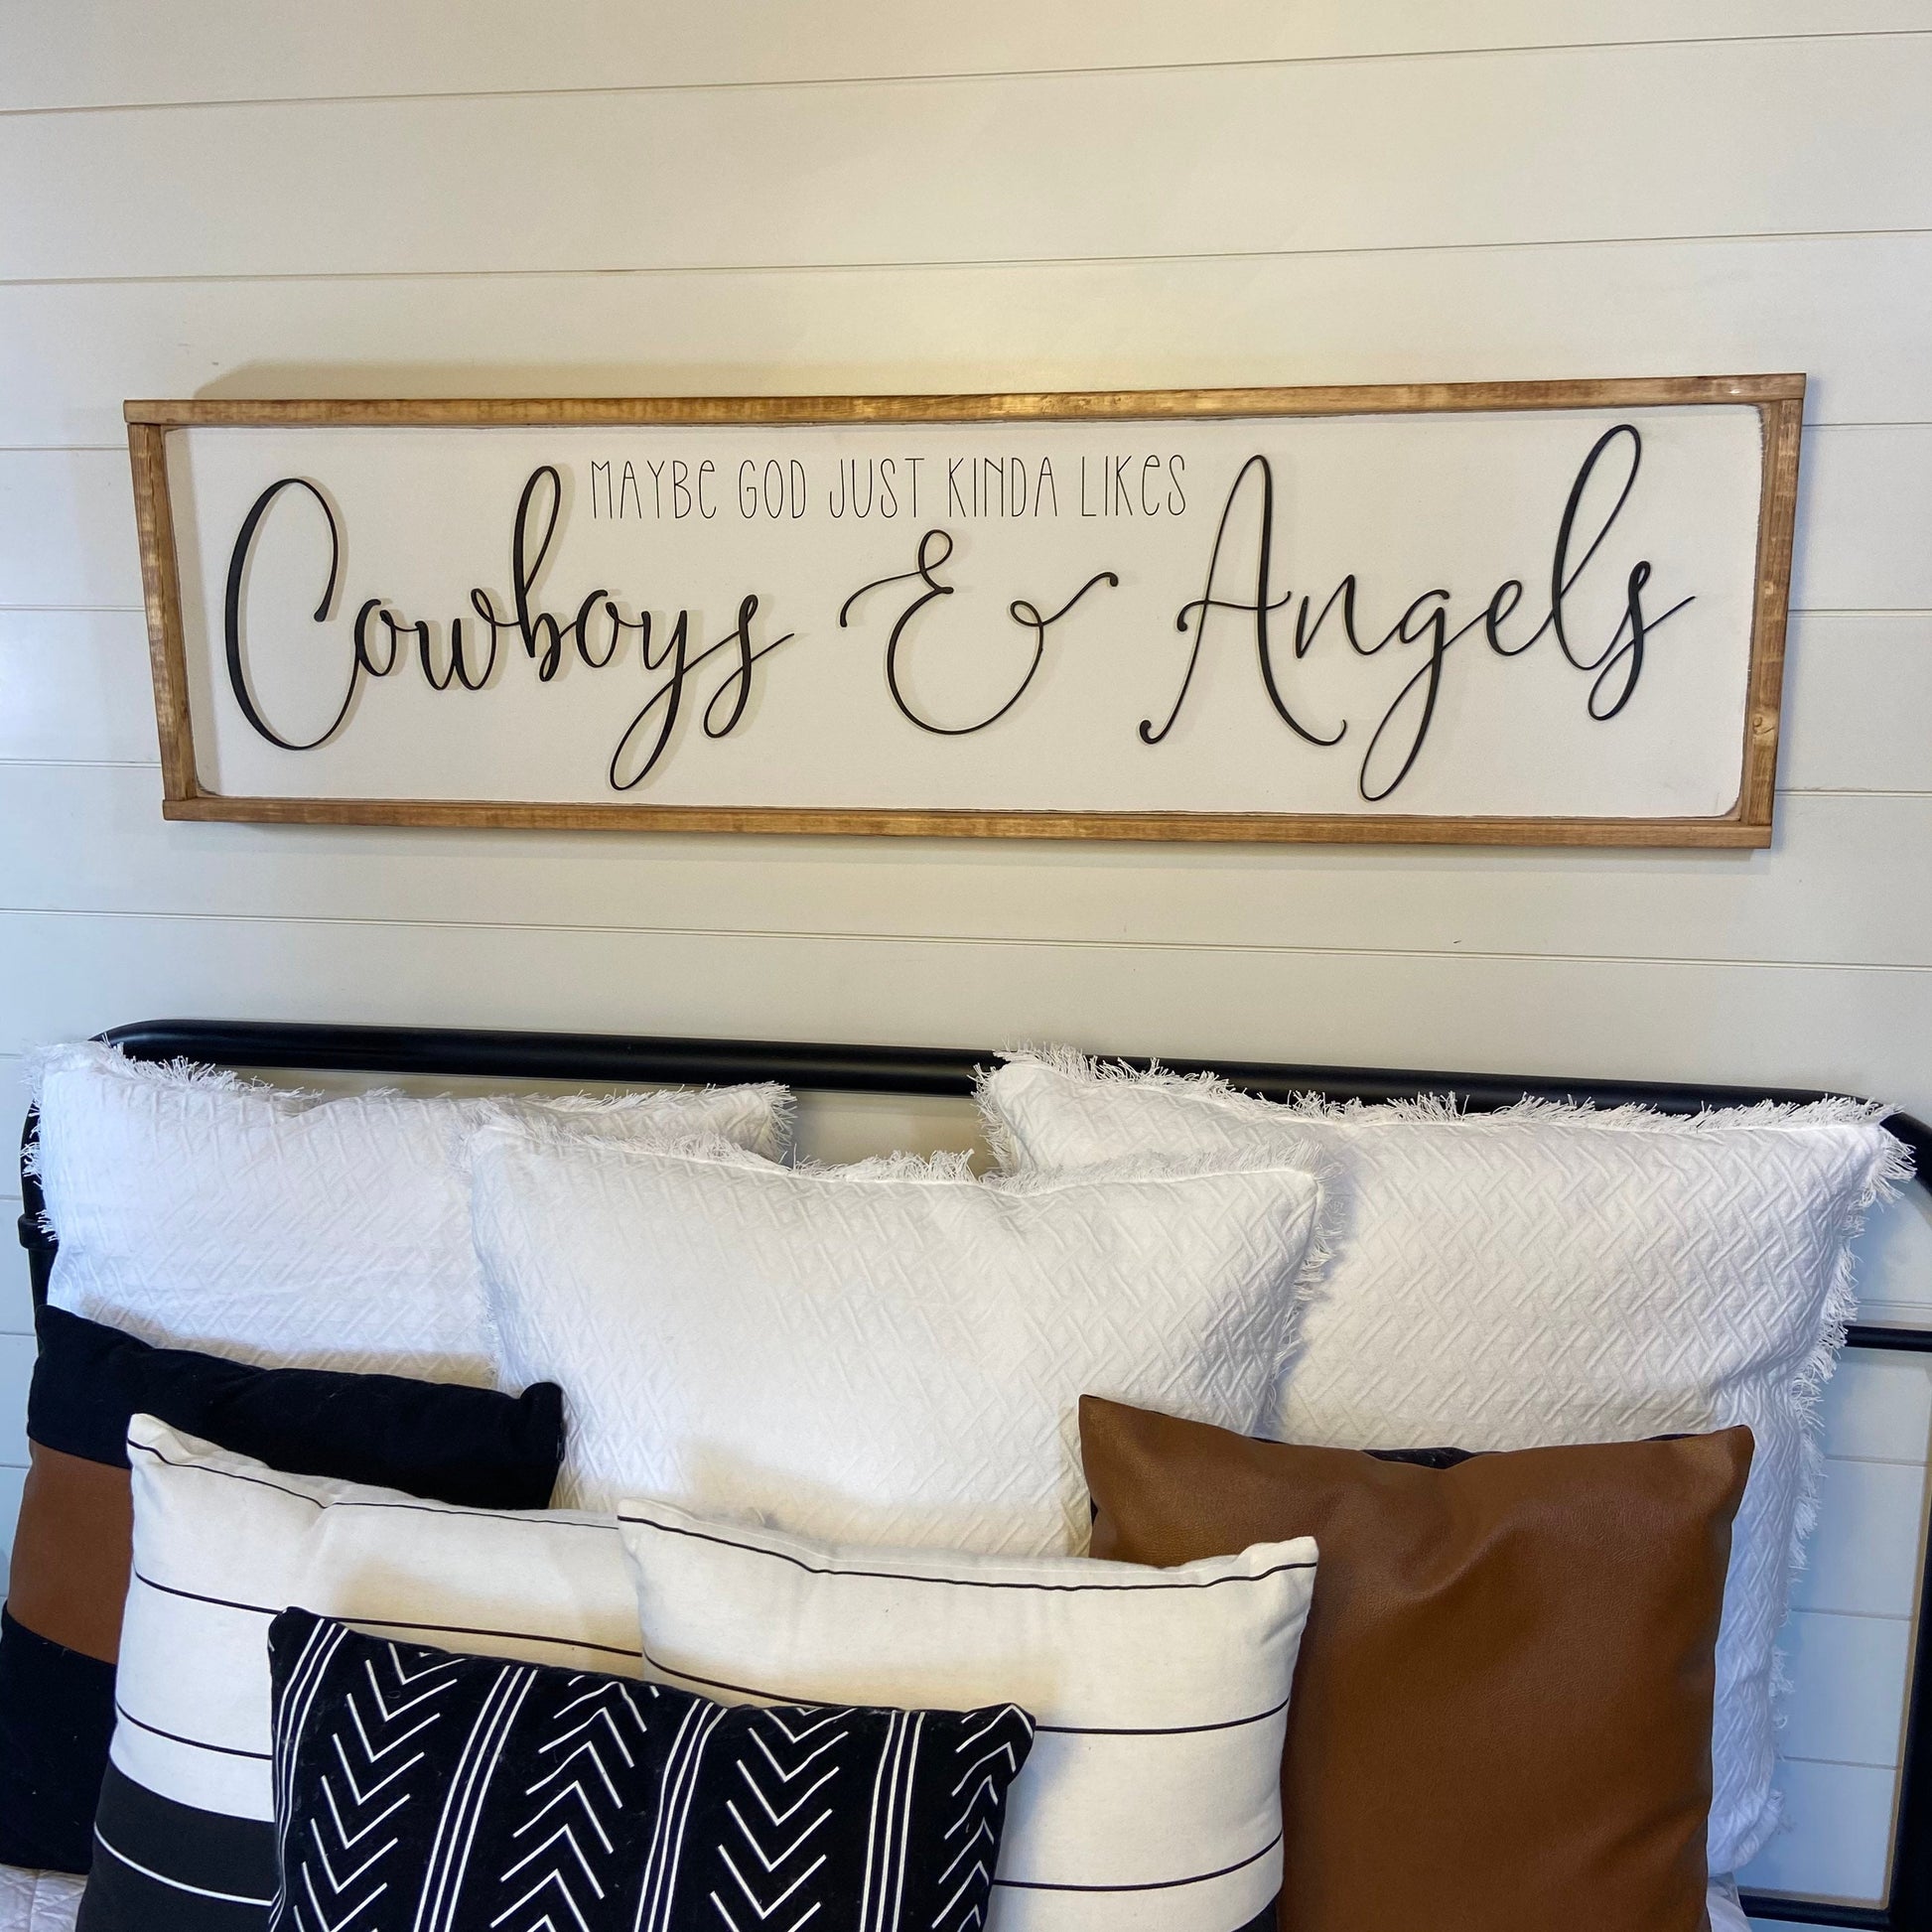 cowboys & angels - above the bed sign [FREE SHIPPING!]